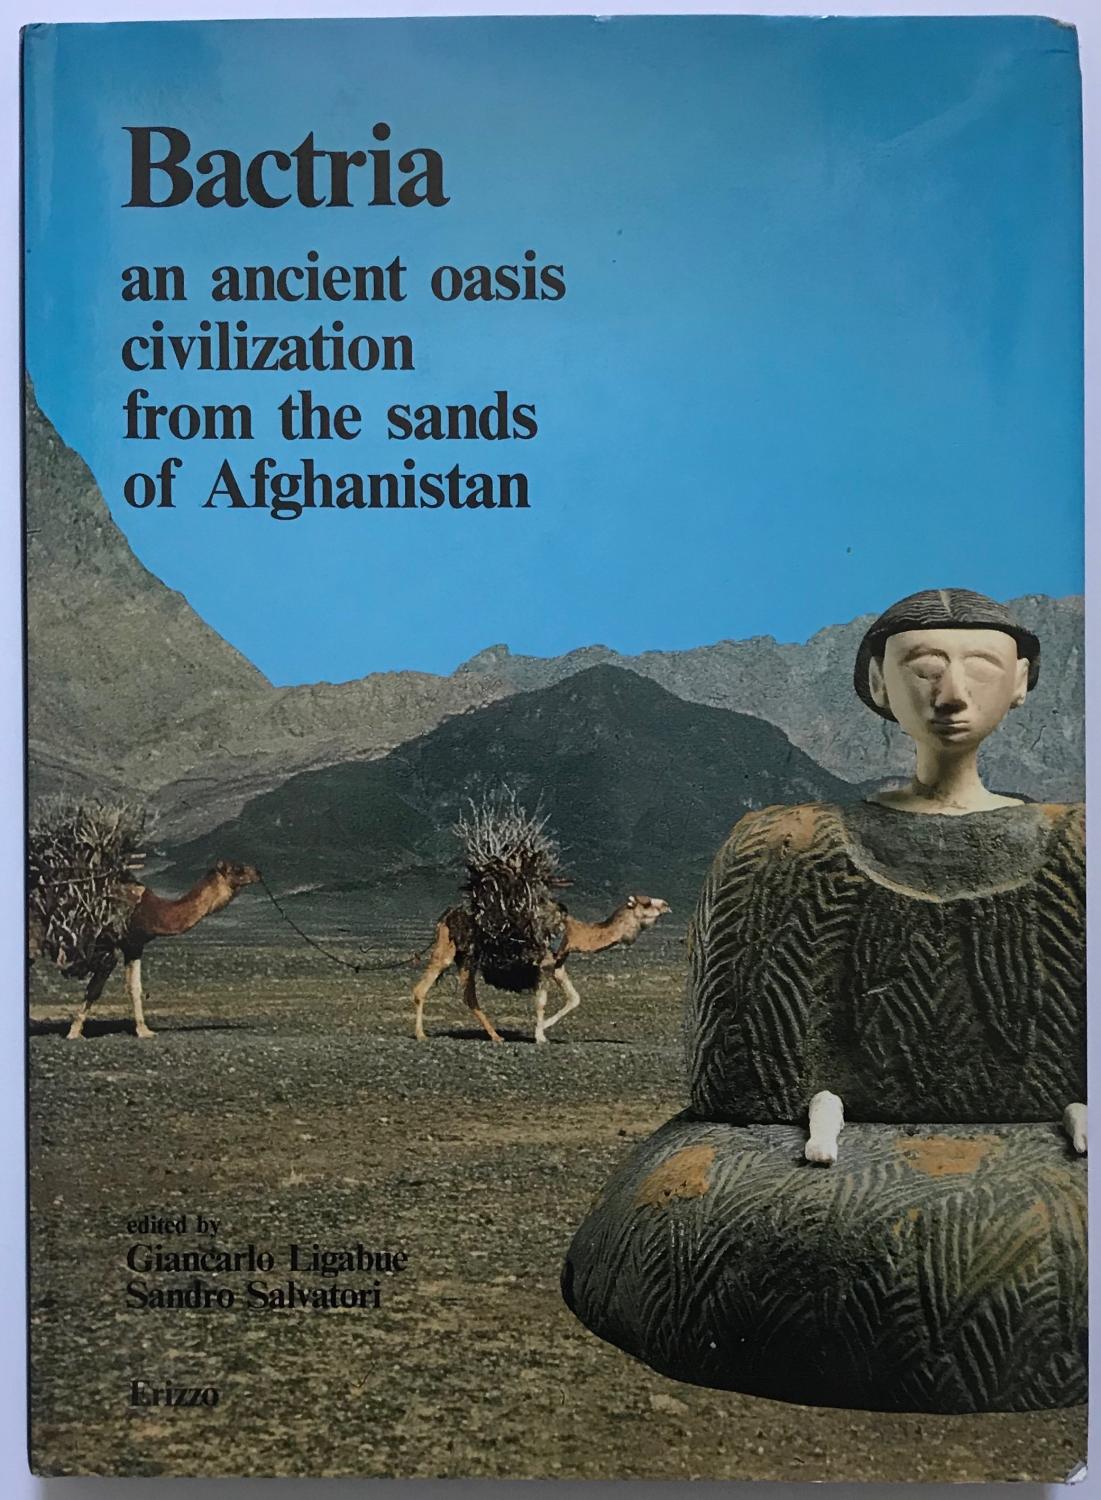 Bactria: An Ancient Oasis Civilization from the Sands of Afghanistan - Giancarlo Ligabue and Sandro Salvatori